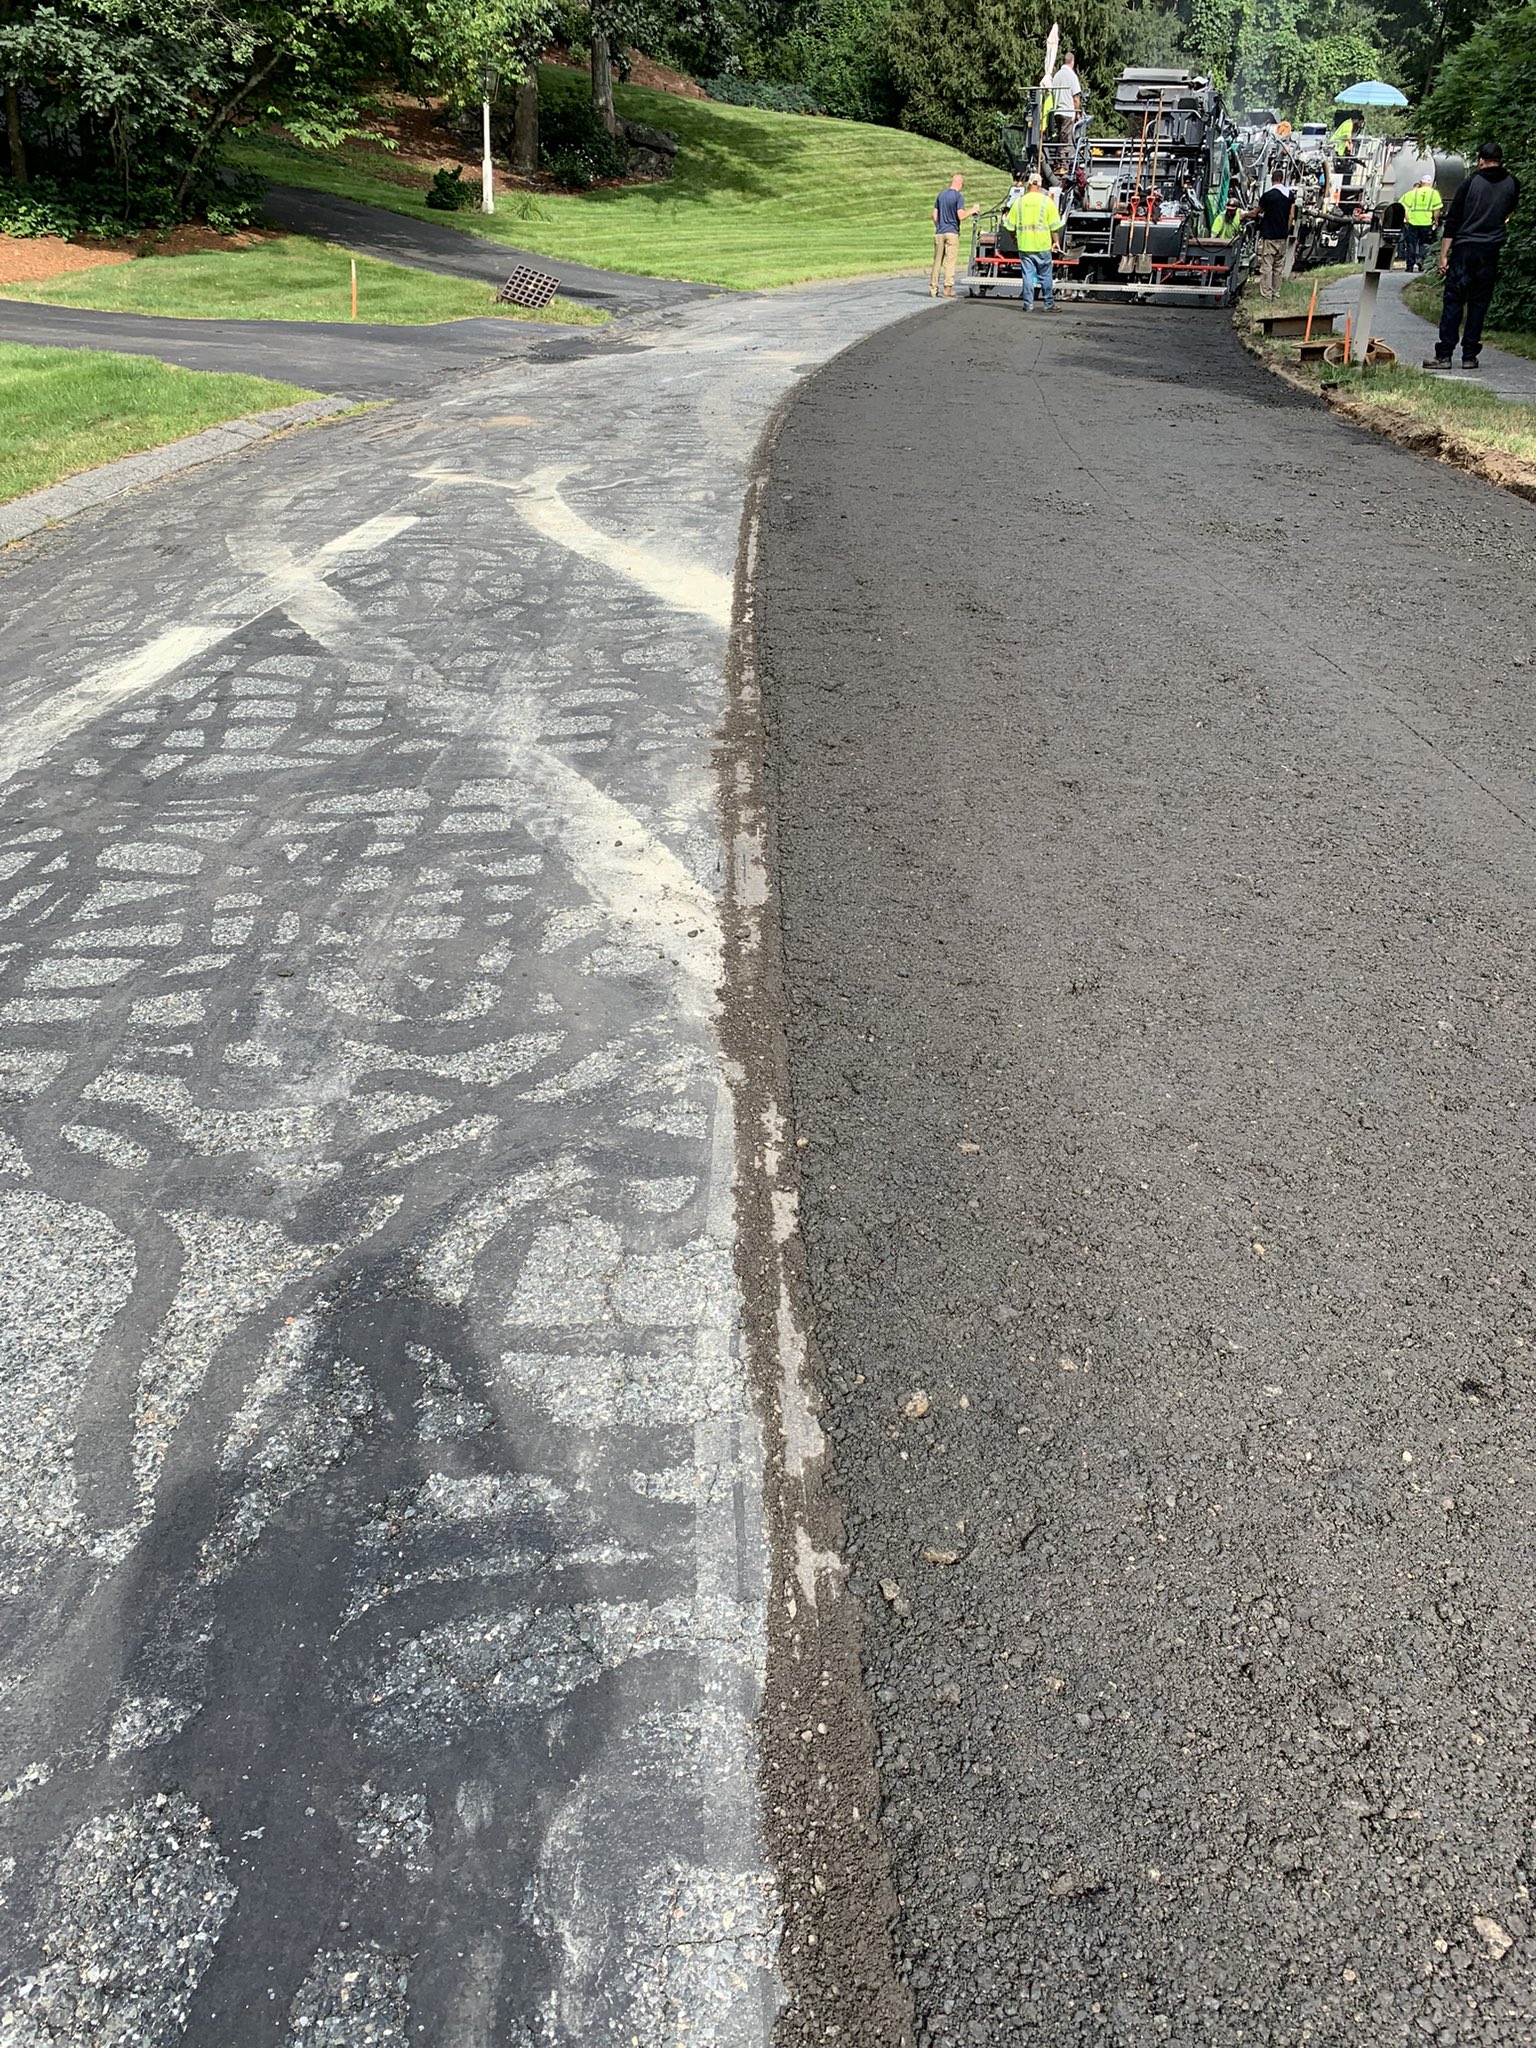 Town introduces more efficient road paving process called cold-in-place recycling